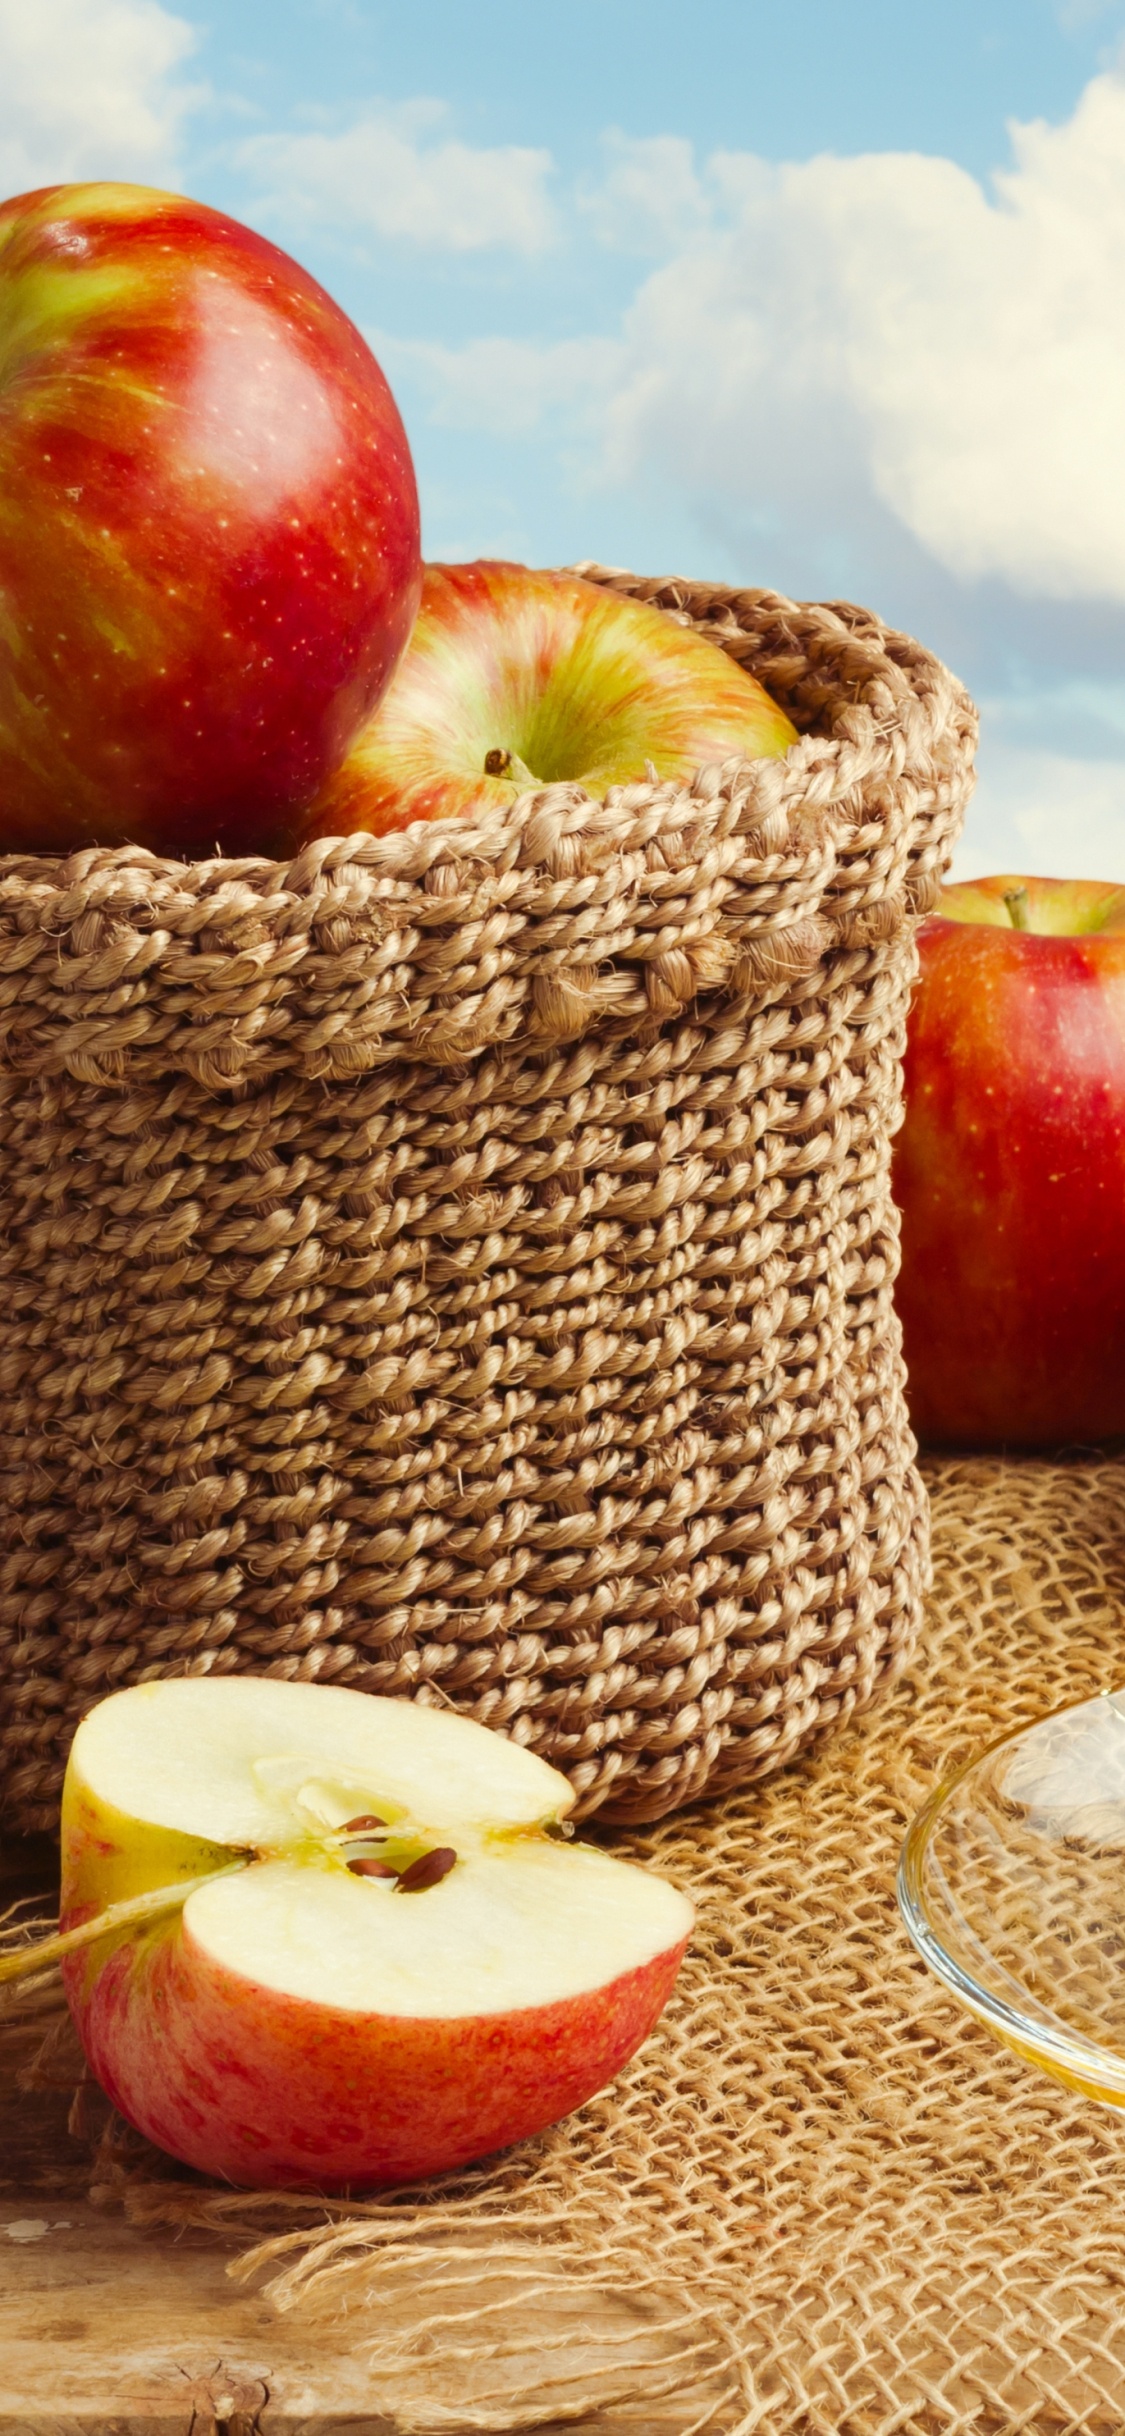 Red Apples on Brown Woven Basket. Wallpaper in 1125x2436 Resolution